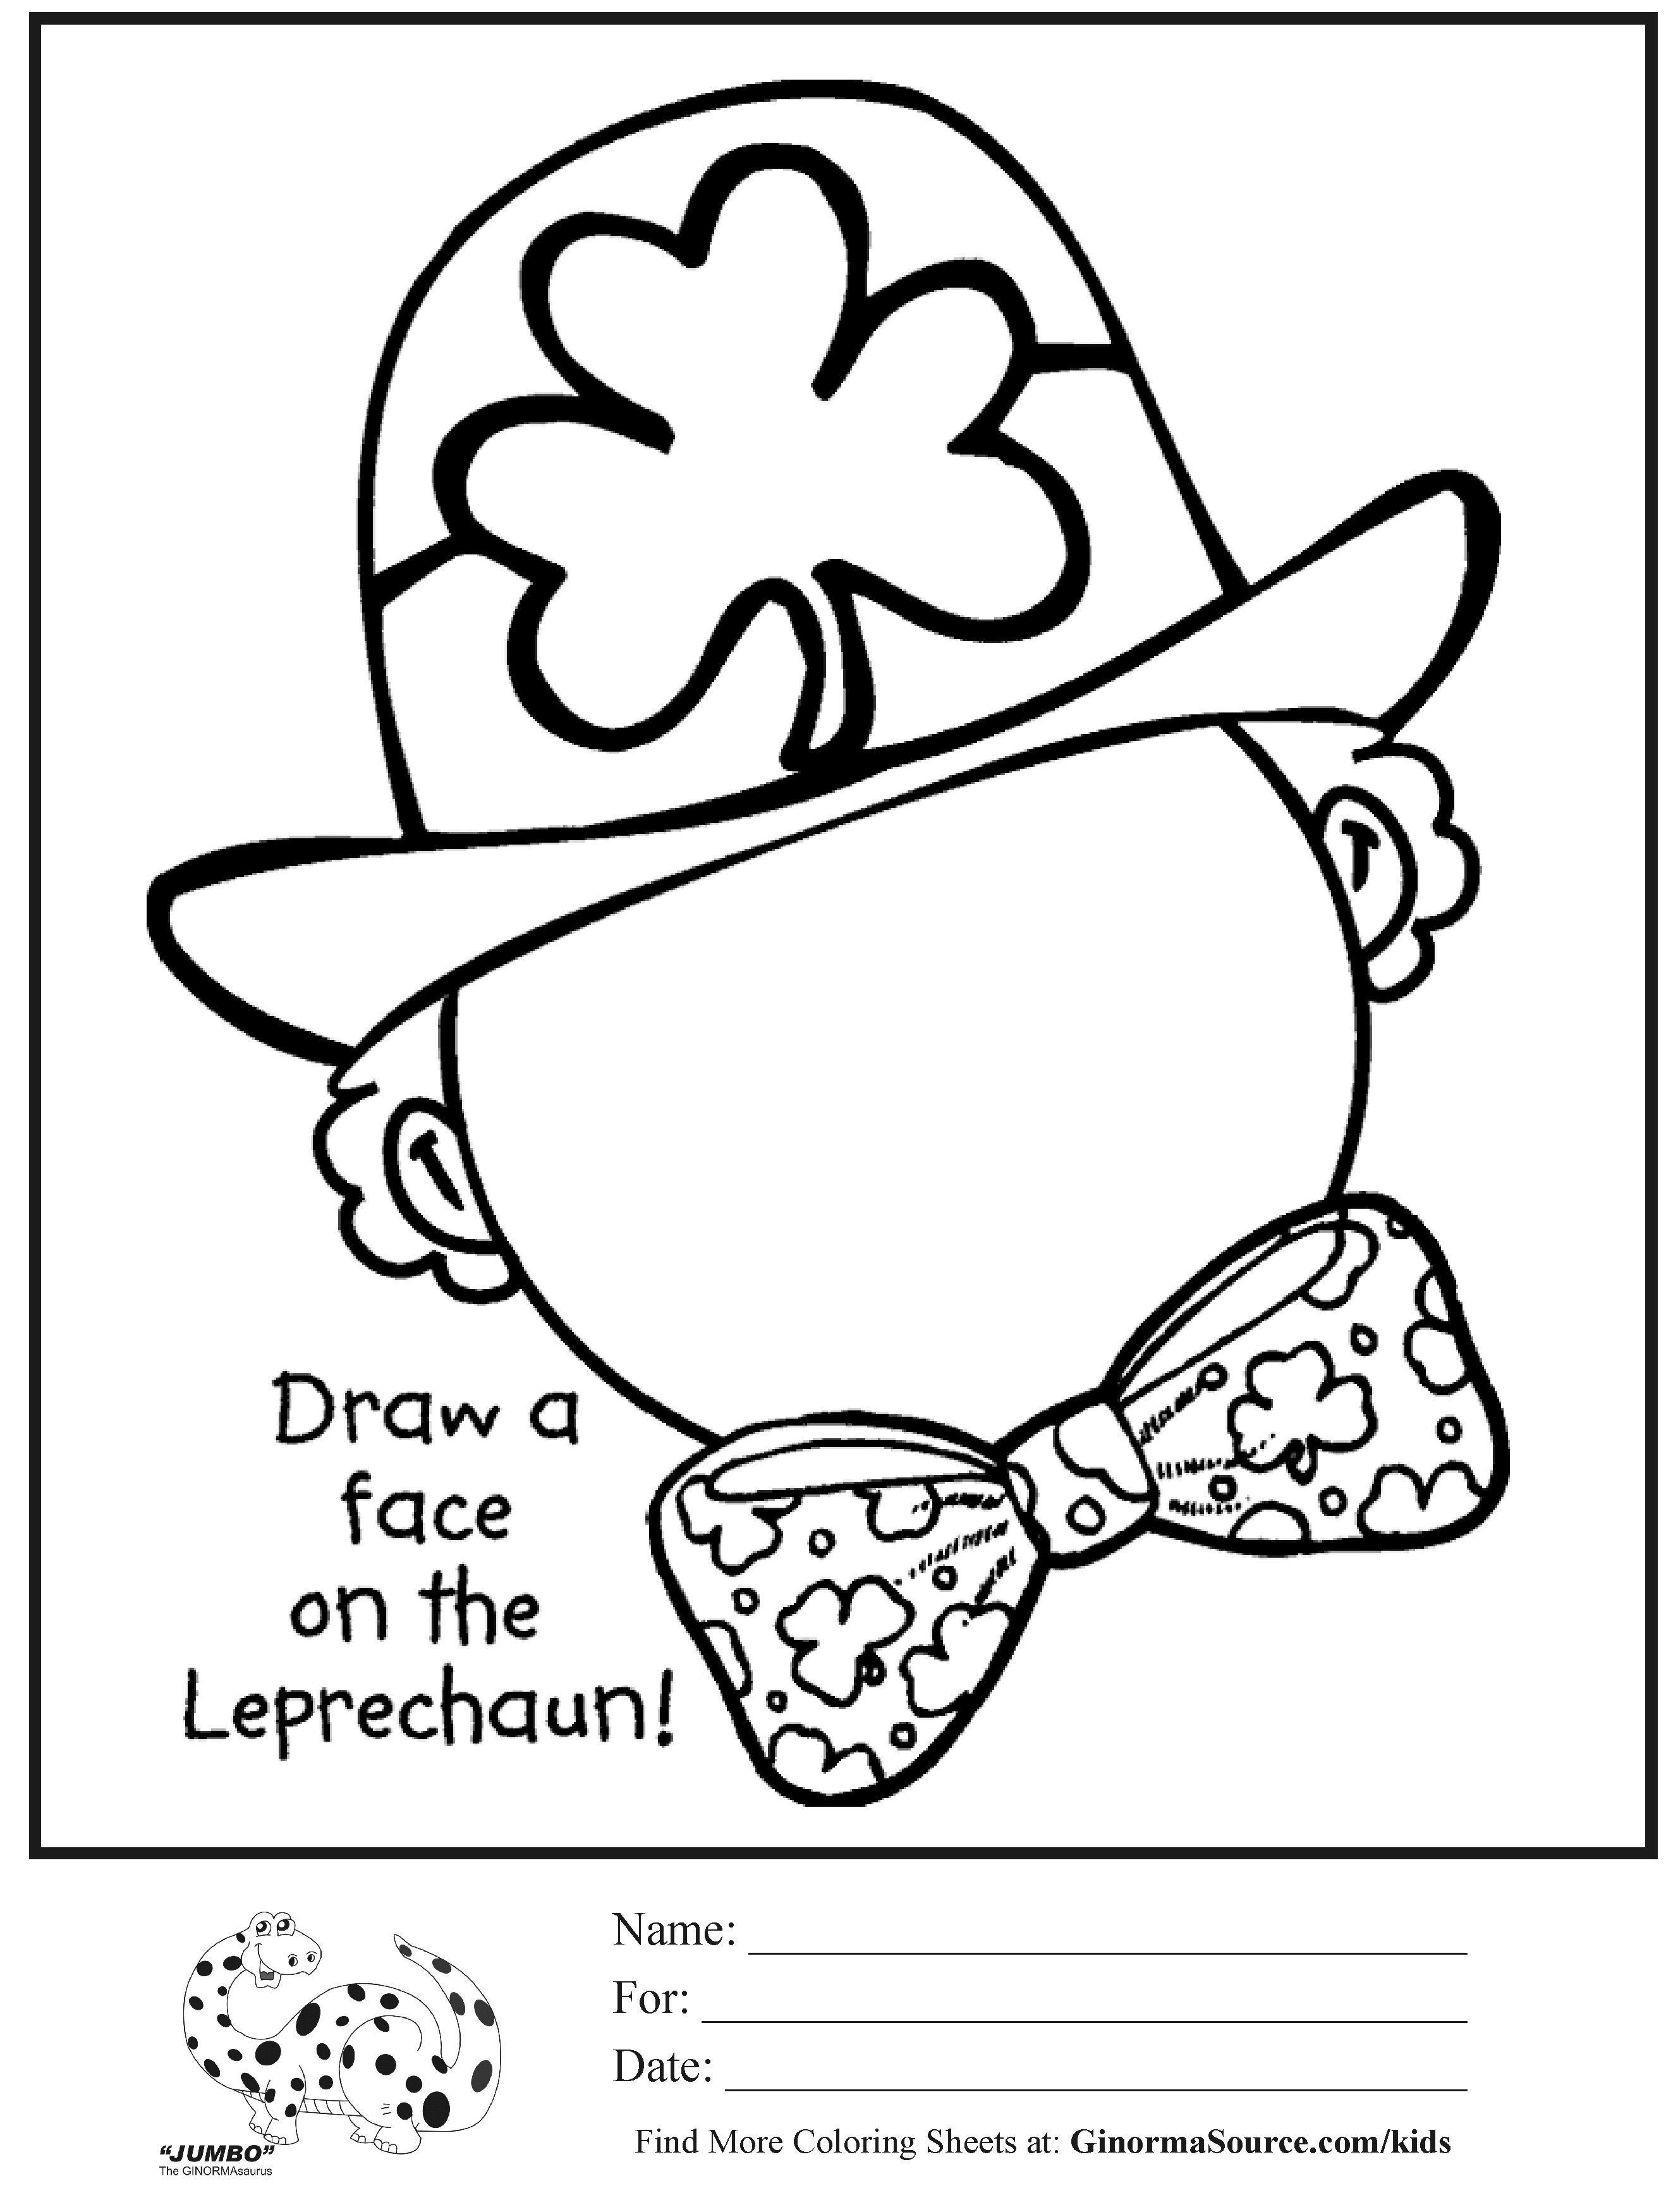 st-patrick-s-day-free-printables-st-patricks-day-coloring-pages